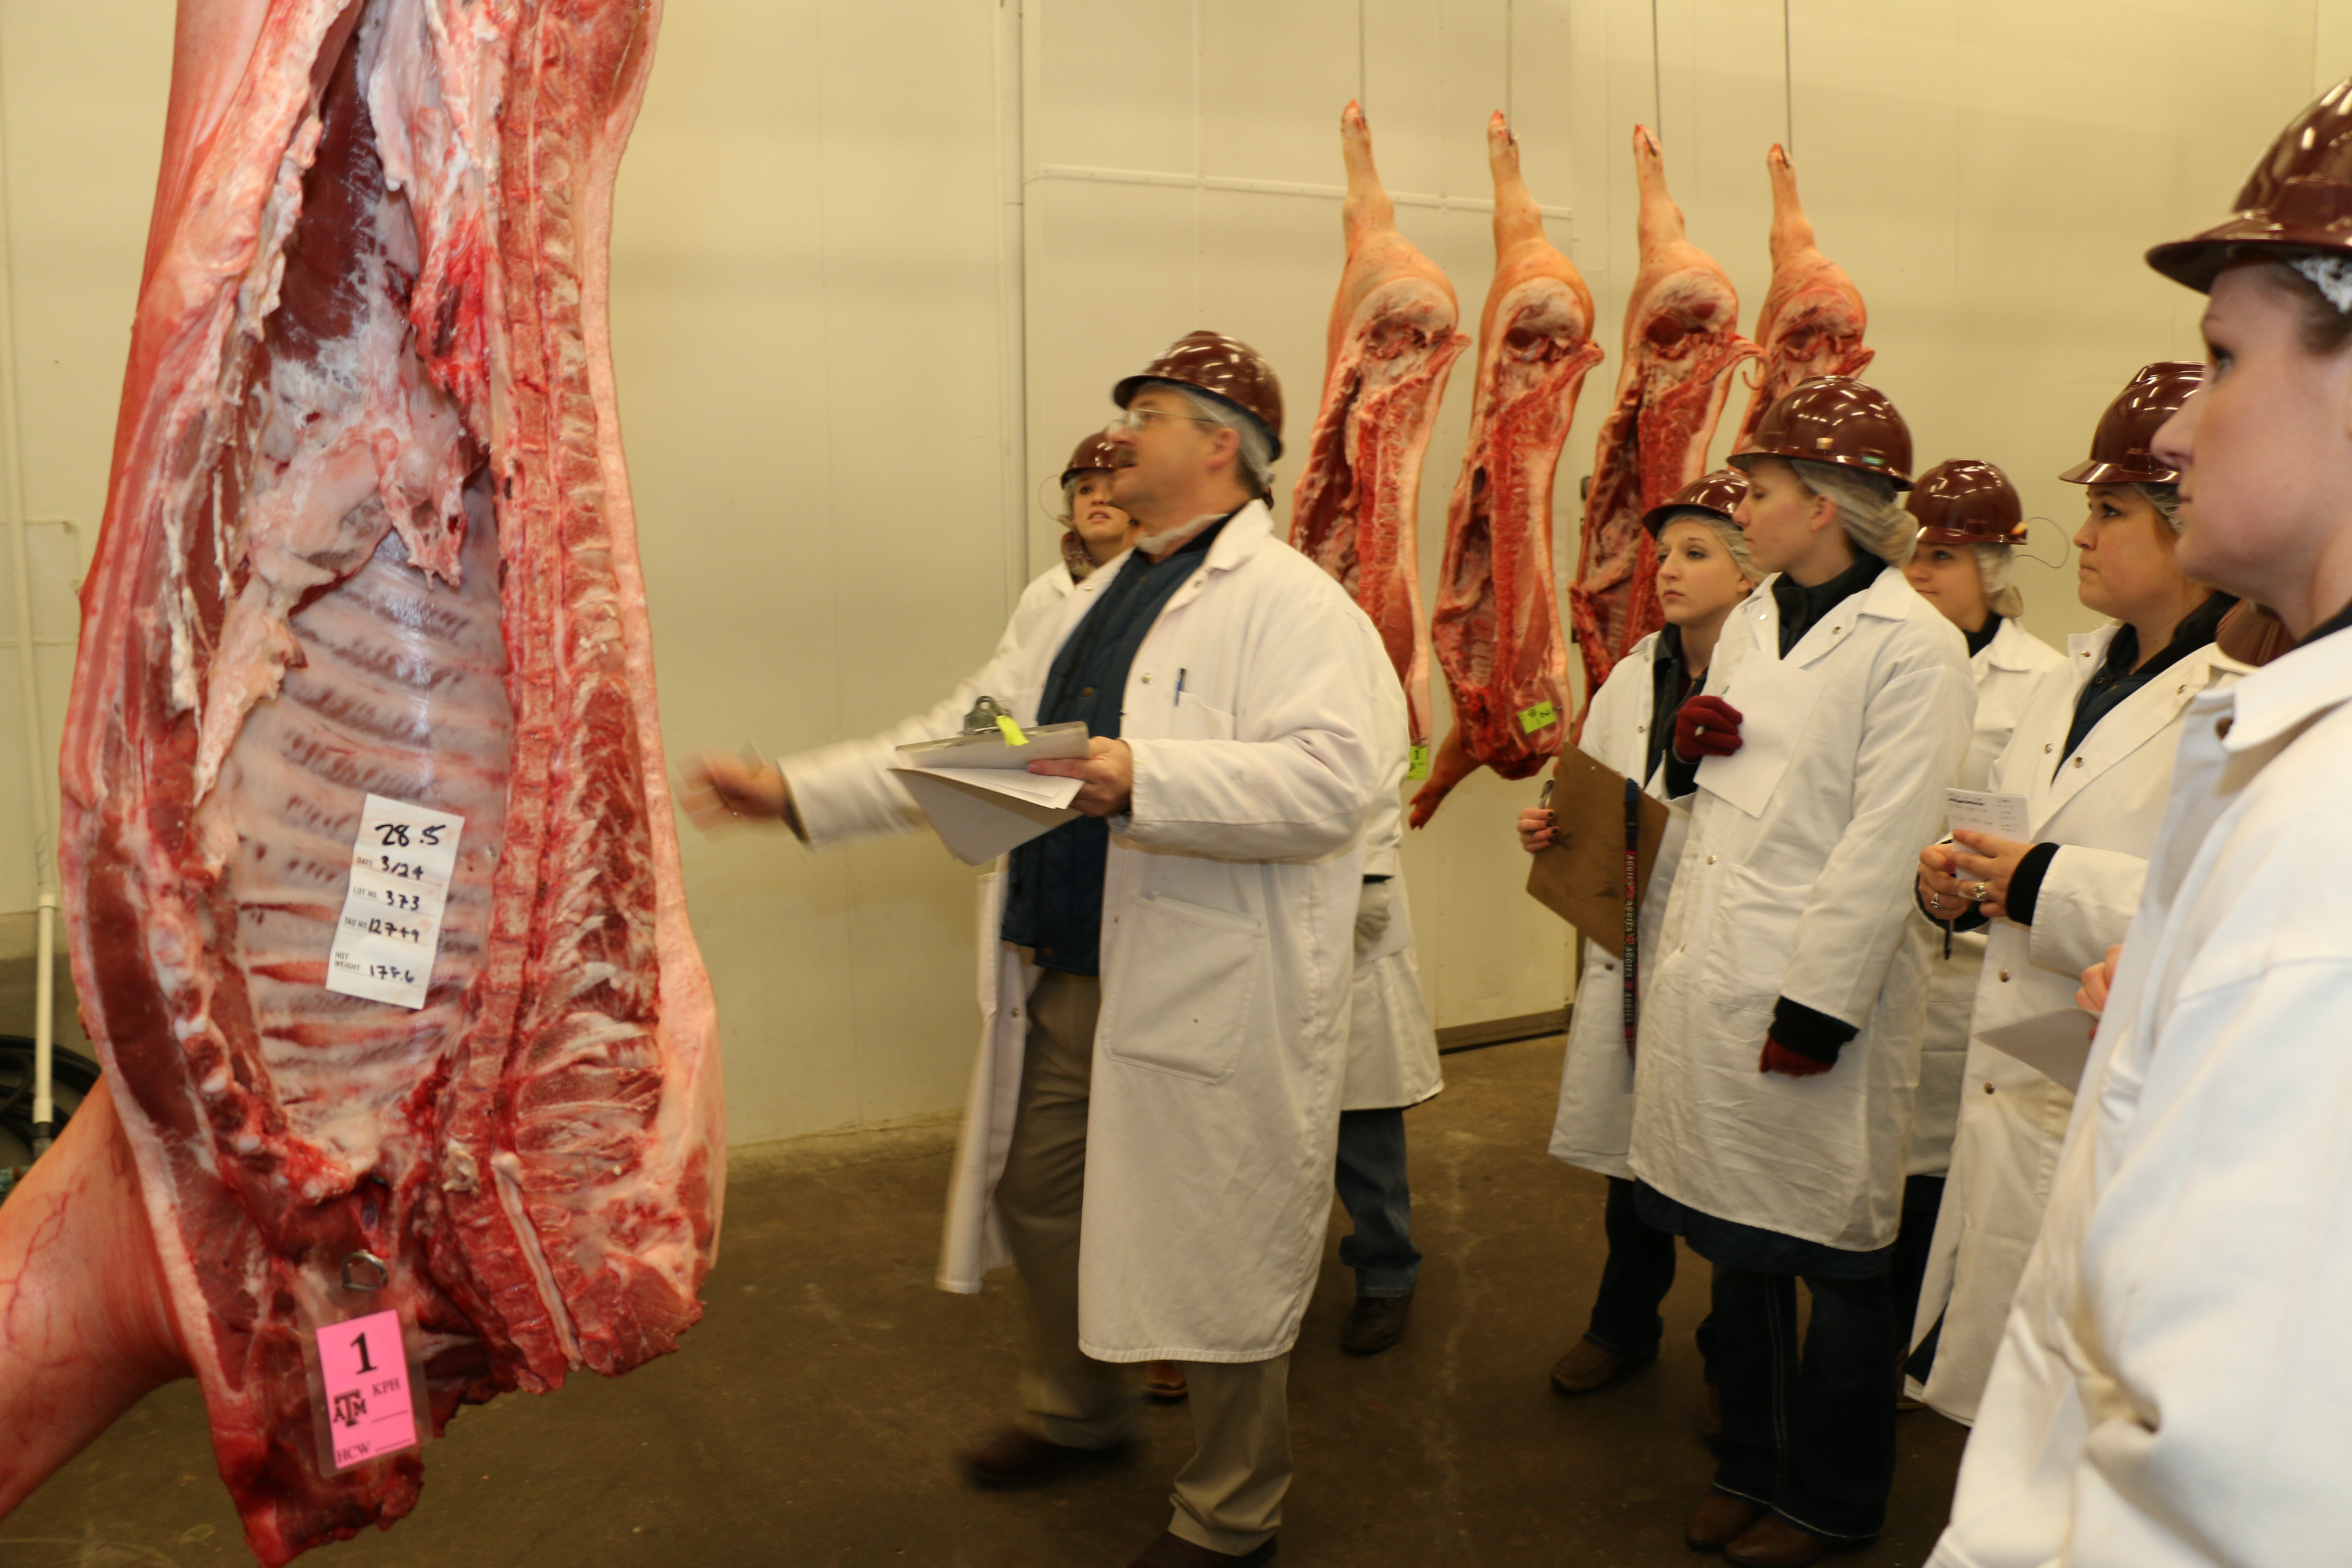 Davey Griffin and members of the Meat Judging Team